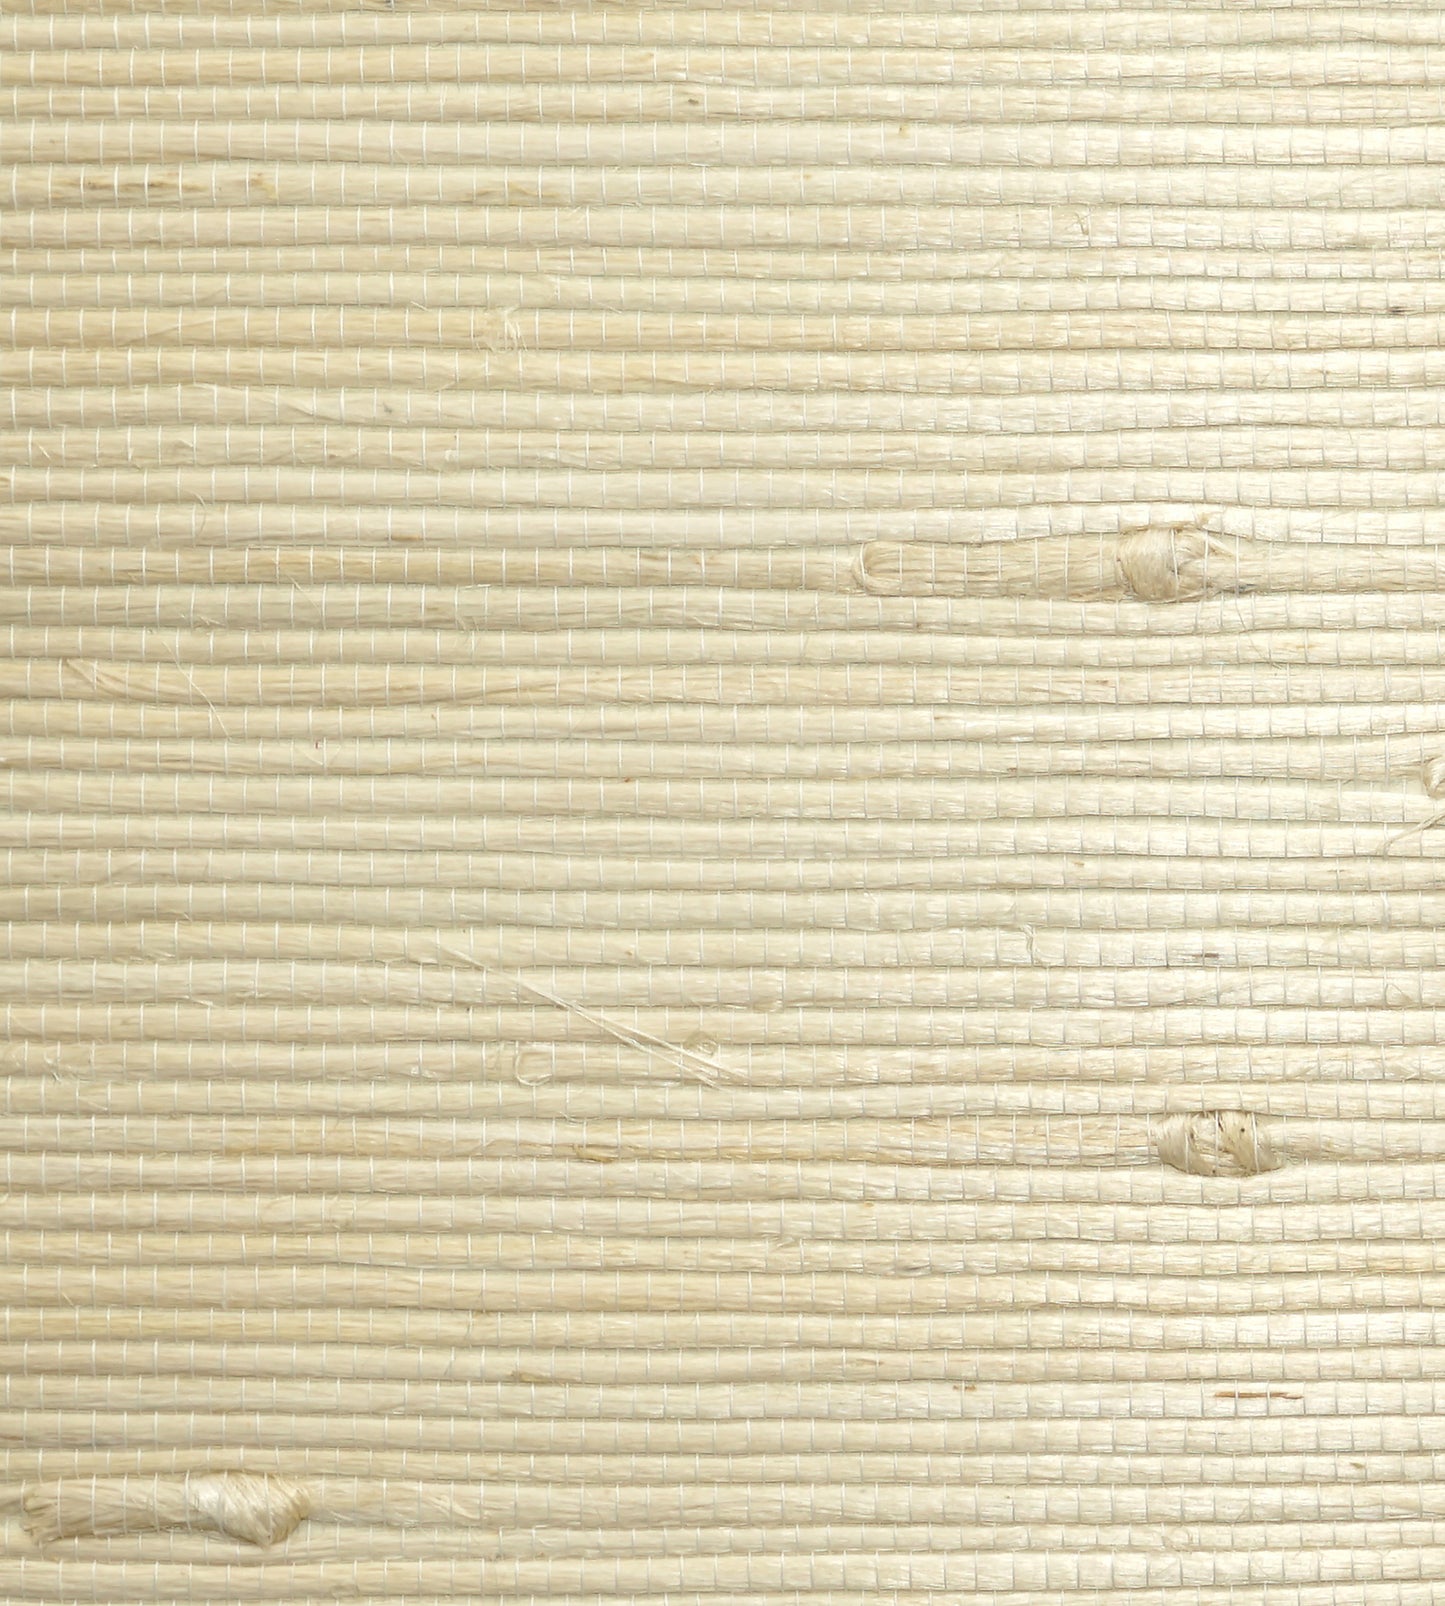 Looking Scalamandre Wallpaper Pattern Wtwsg5636 Name Natural Jute Cotton In The Raw Texture Wallpaper